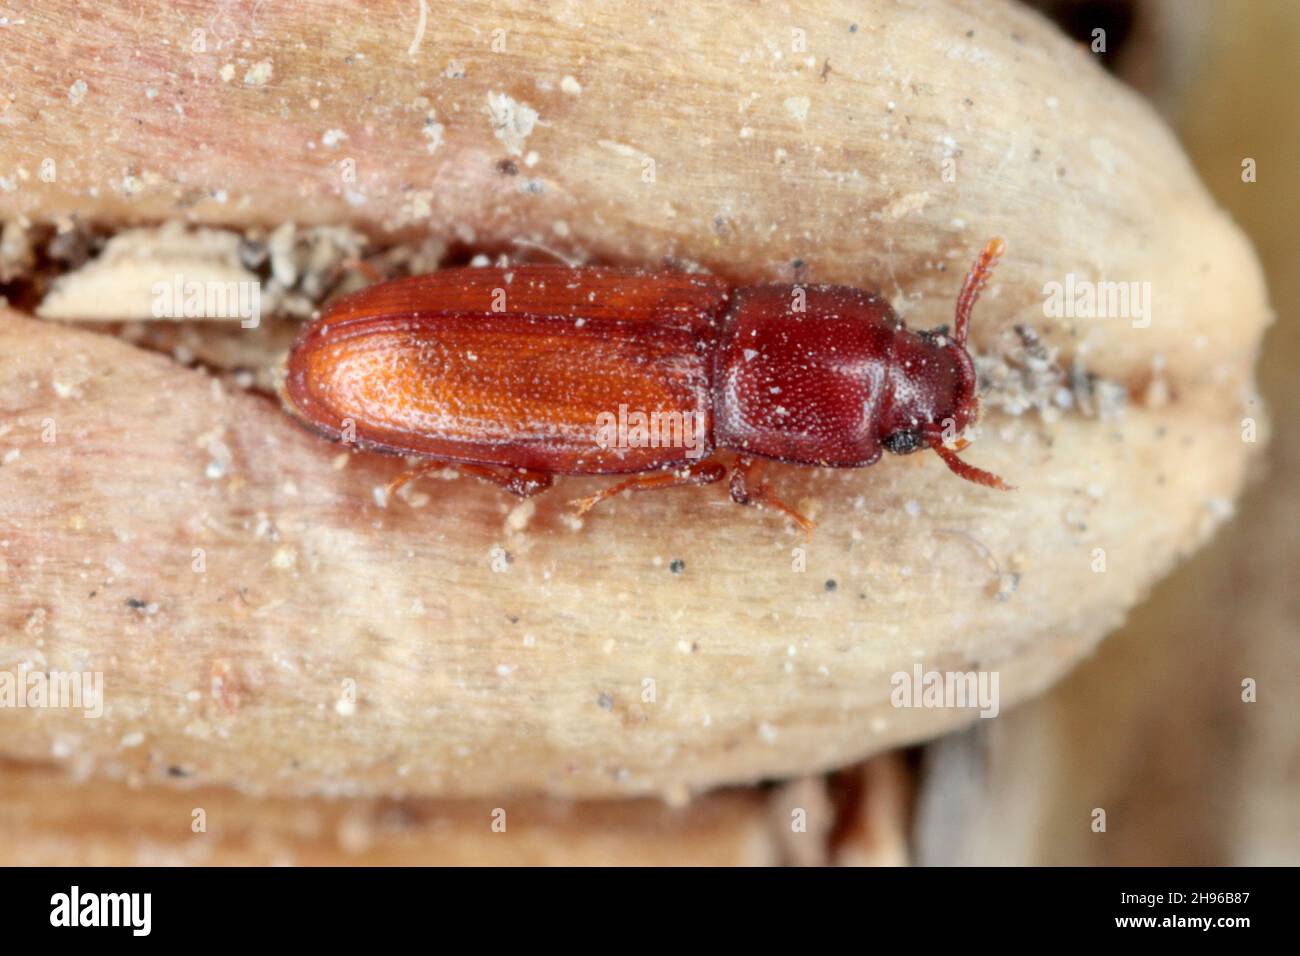 Palorus subdepressus is a species of beetle in the family Tenebrionidae, the darkling beetles. Beetle on wheat grain. Stock Photo